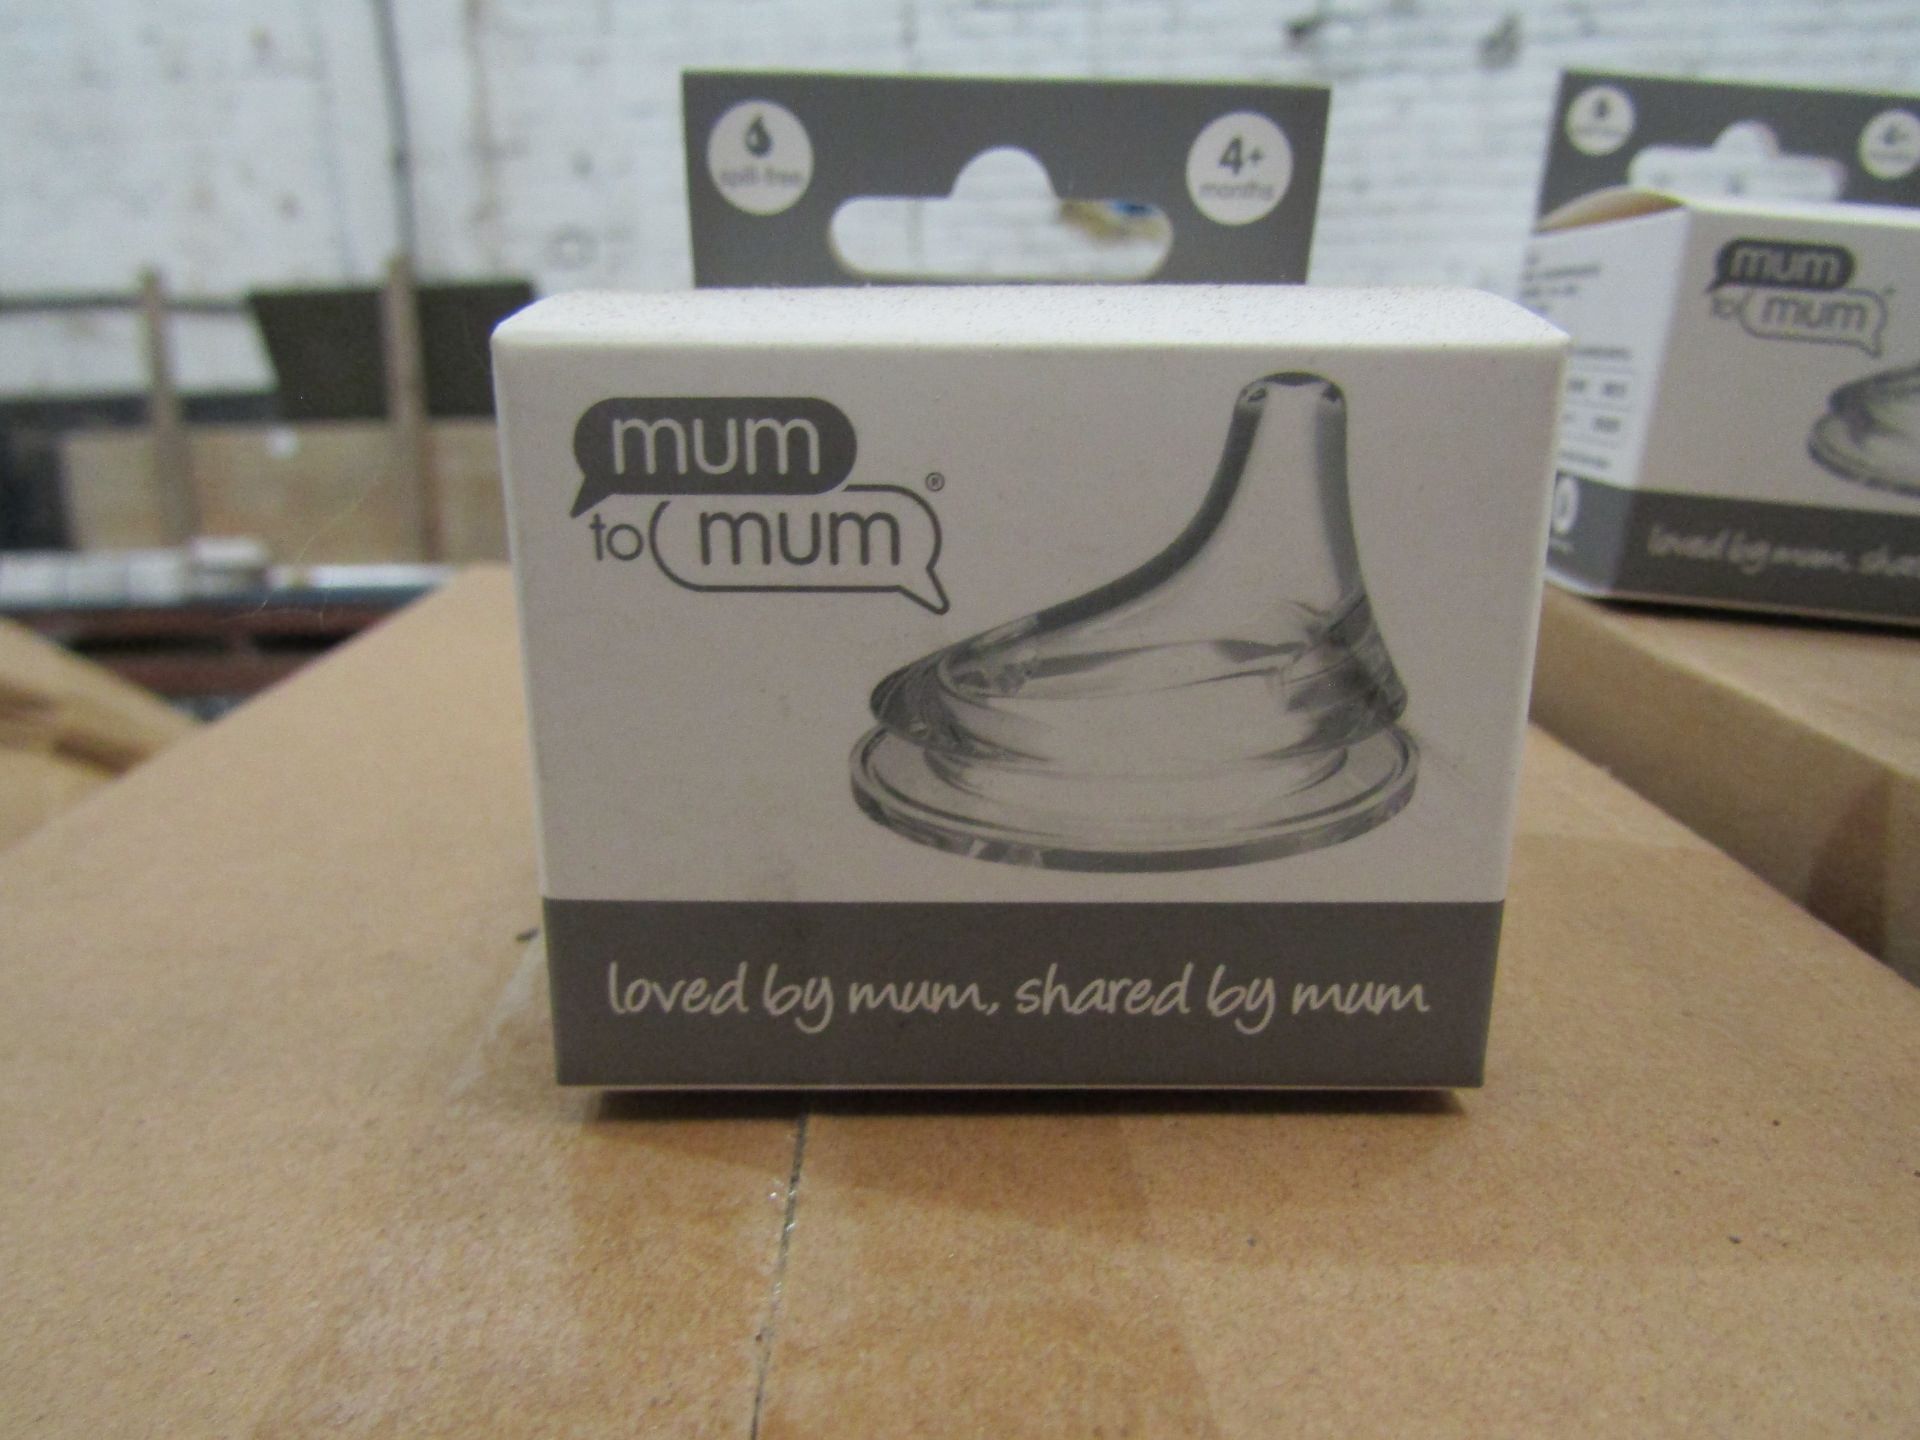 24x Mum To Mum 4 Month Plus Silicone Spout Spill Free, New & Packaged